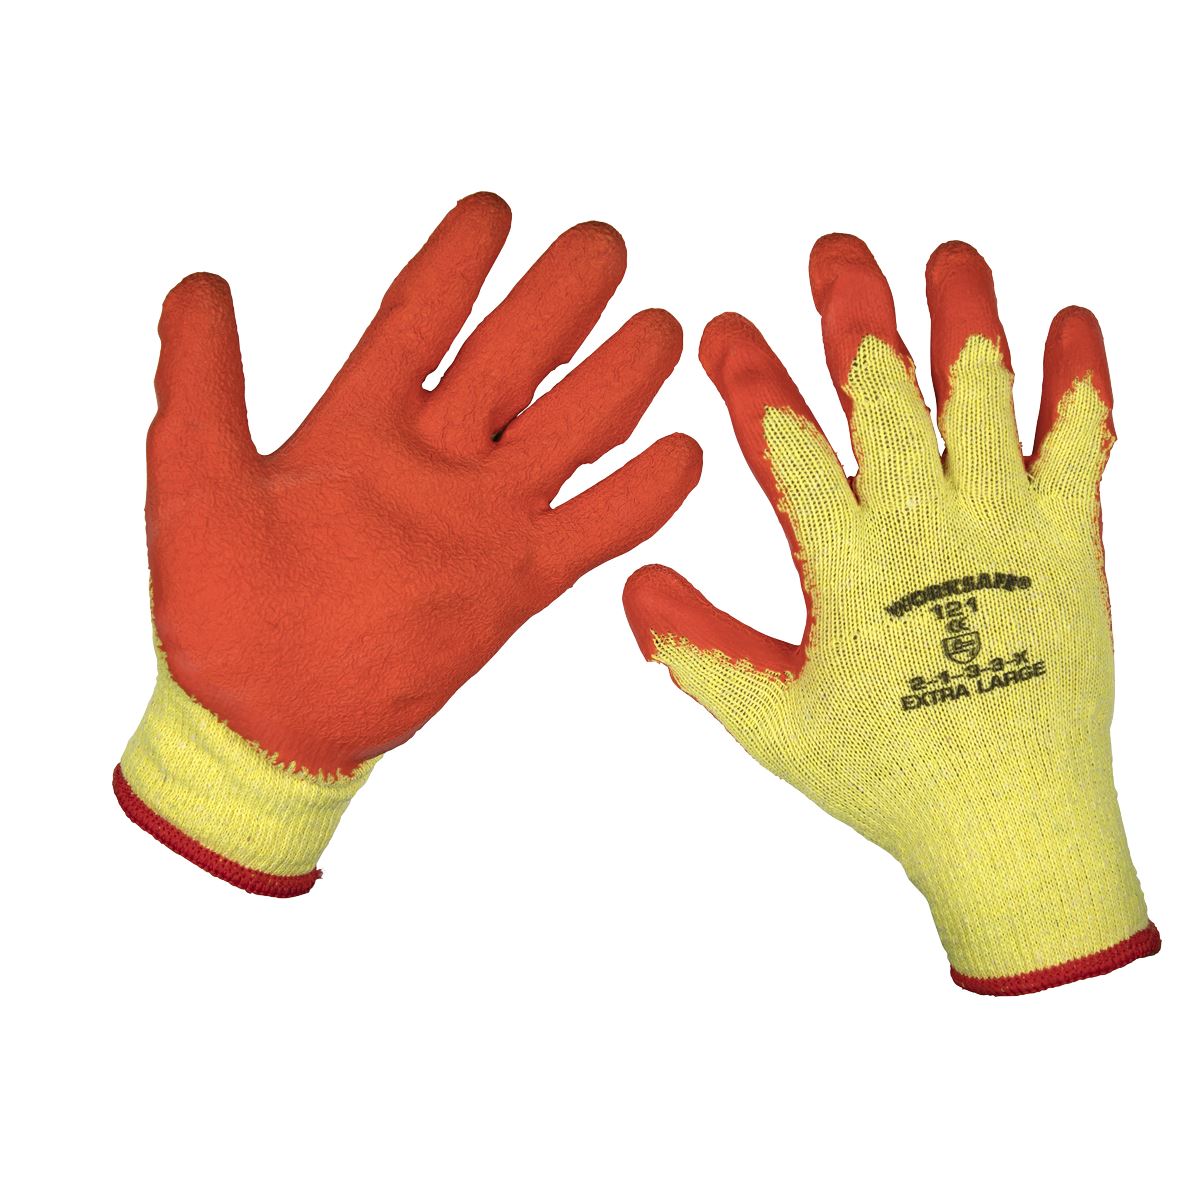 Worksafe by Sealey Super Grip Knitted Gloves Latex Palm (X-Large) - Pack of 120 Pairs